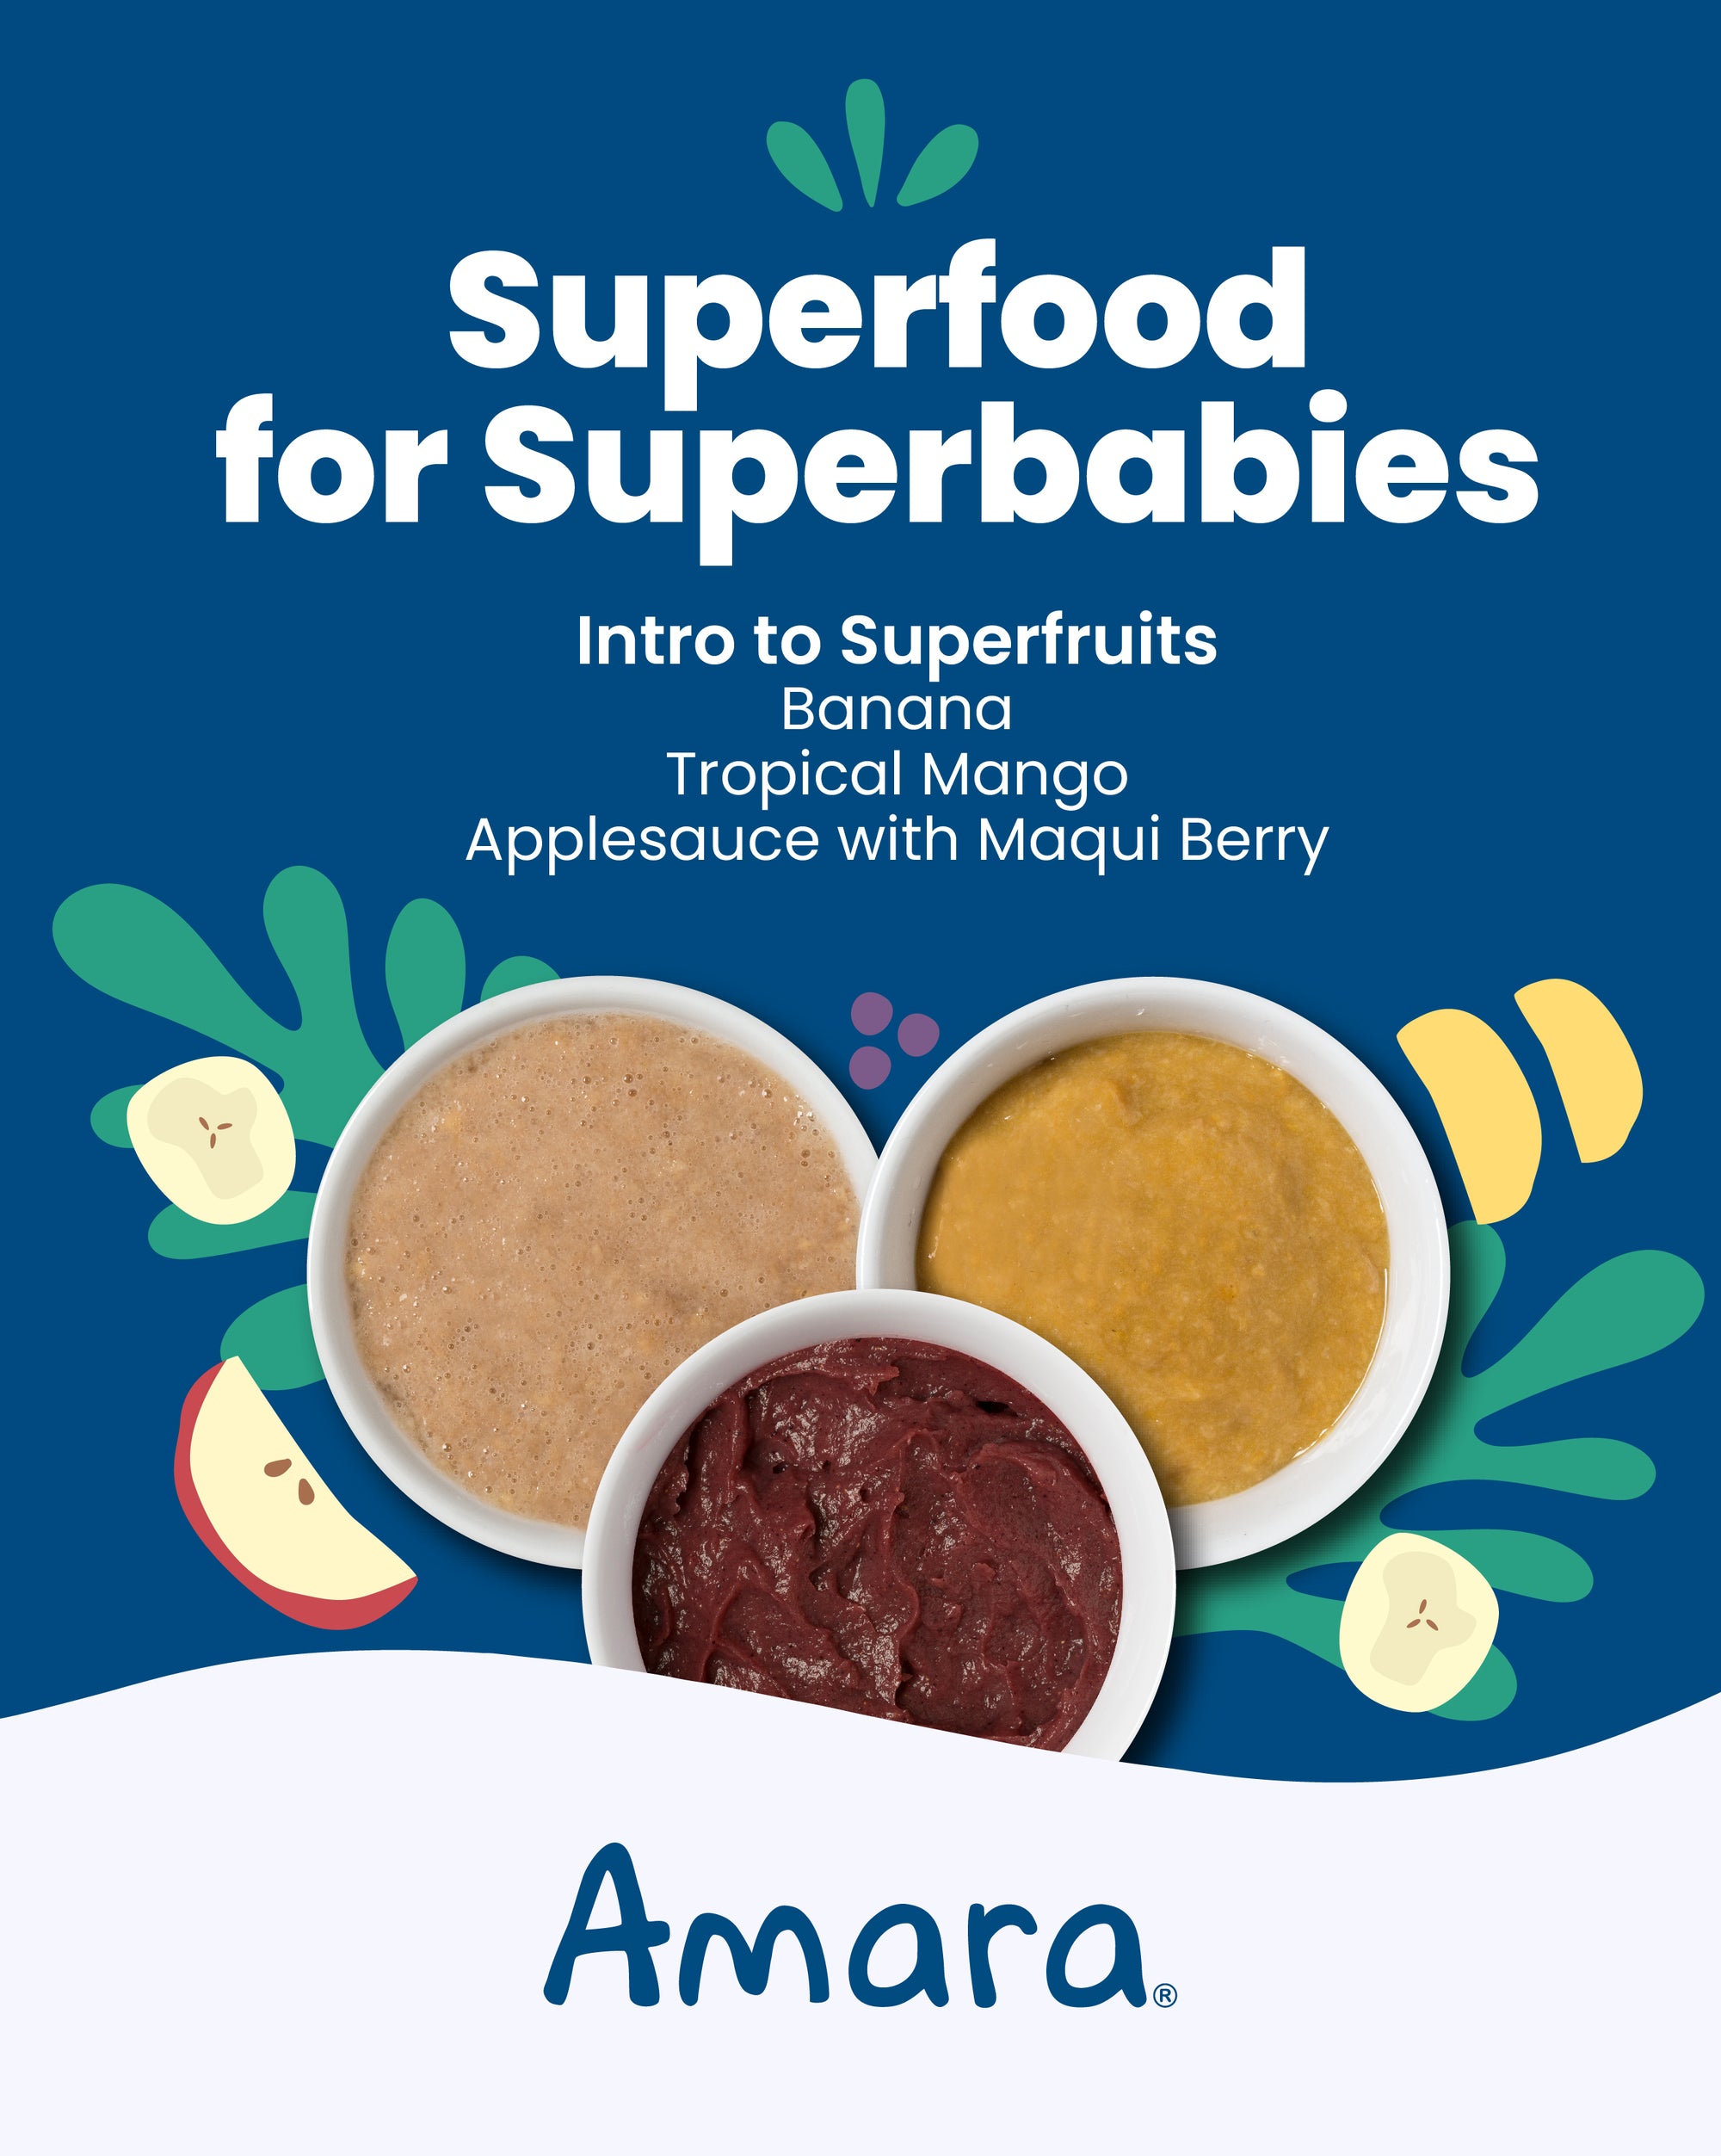 Introduction to Superfruits Variety Pack.